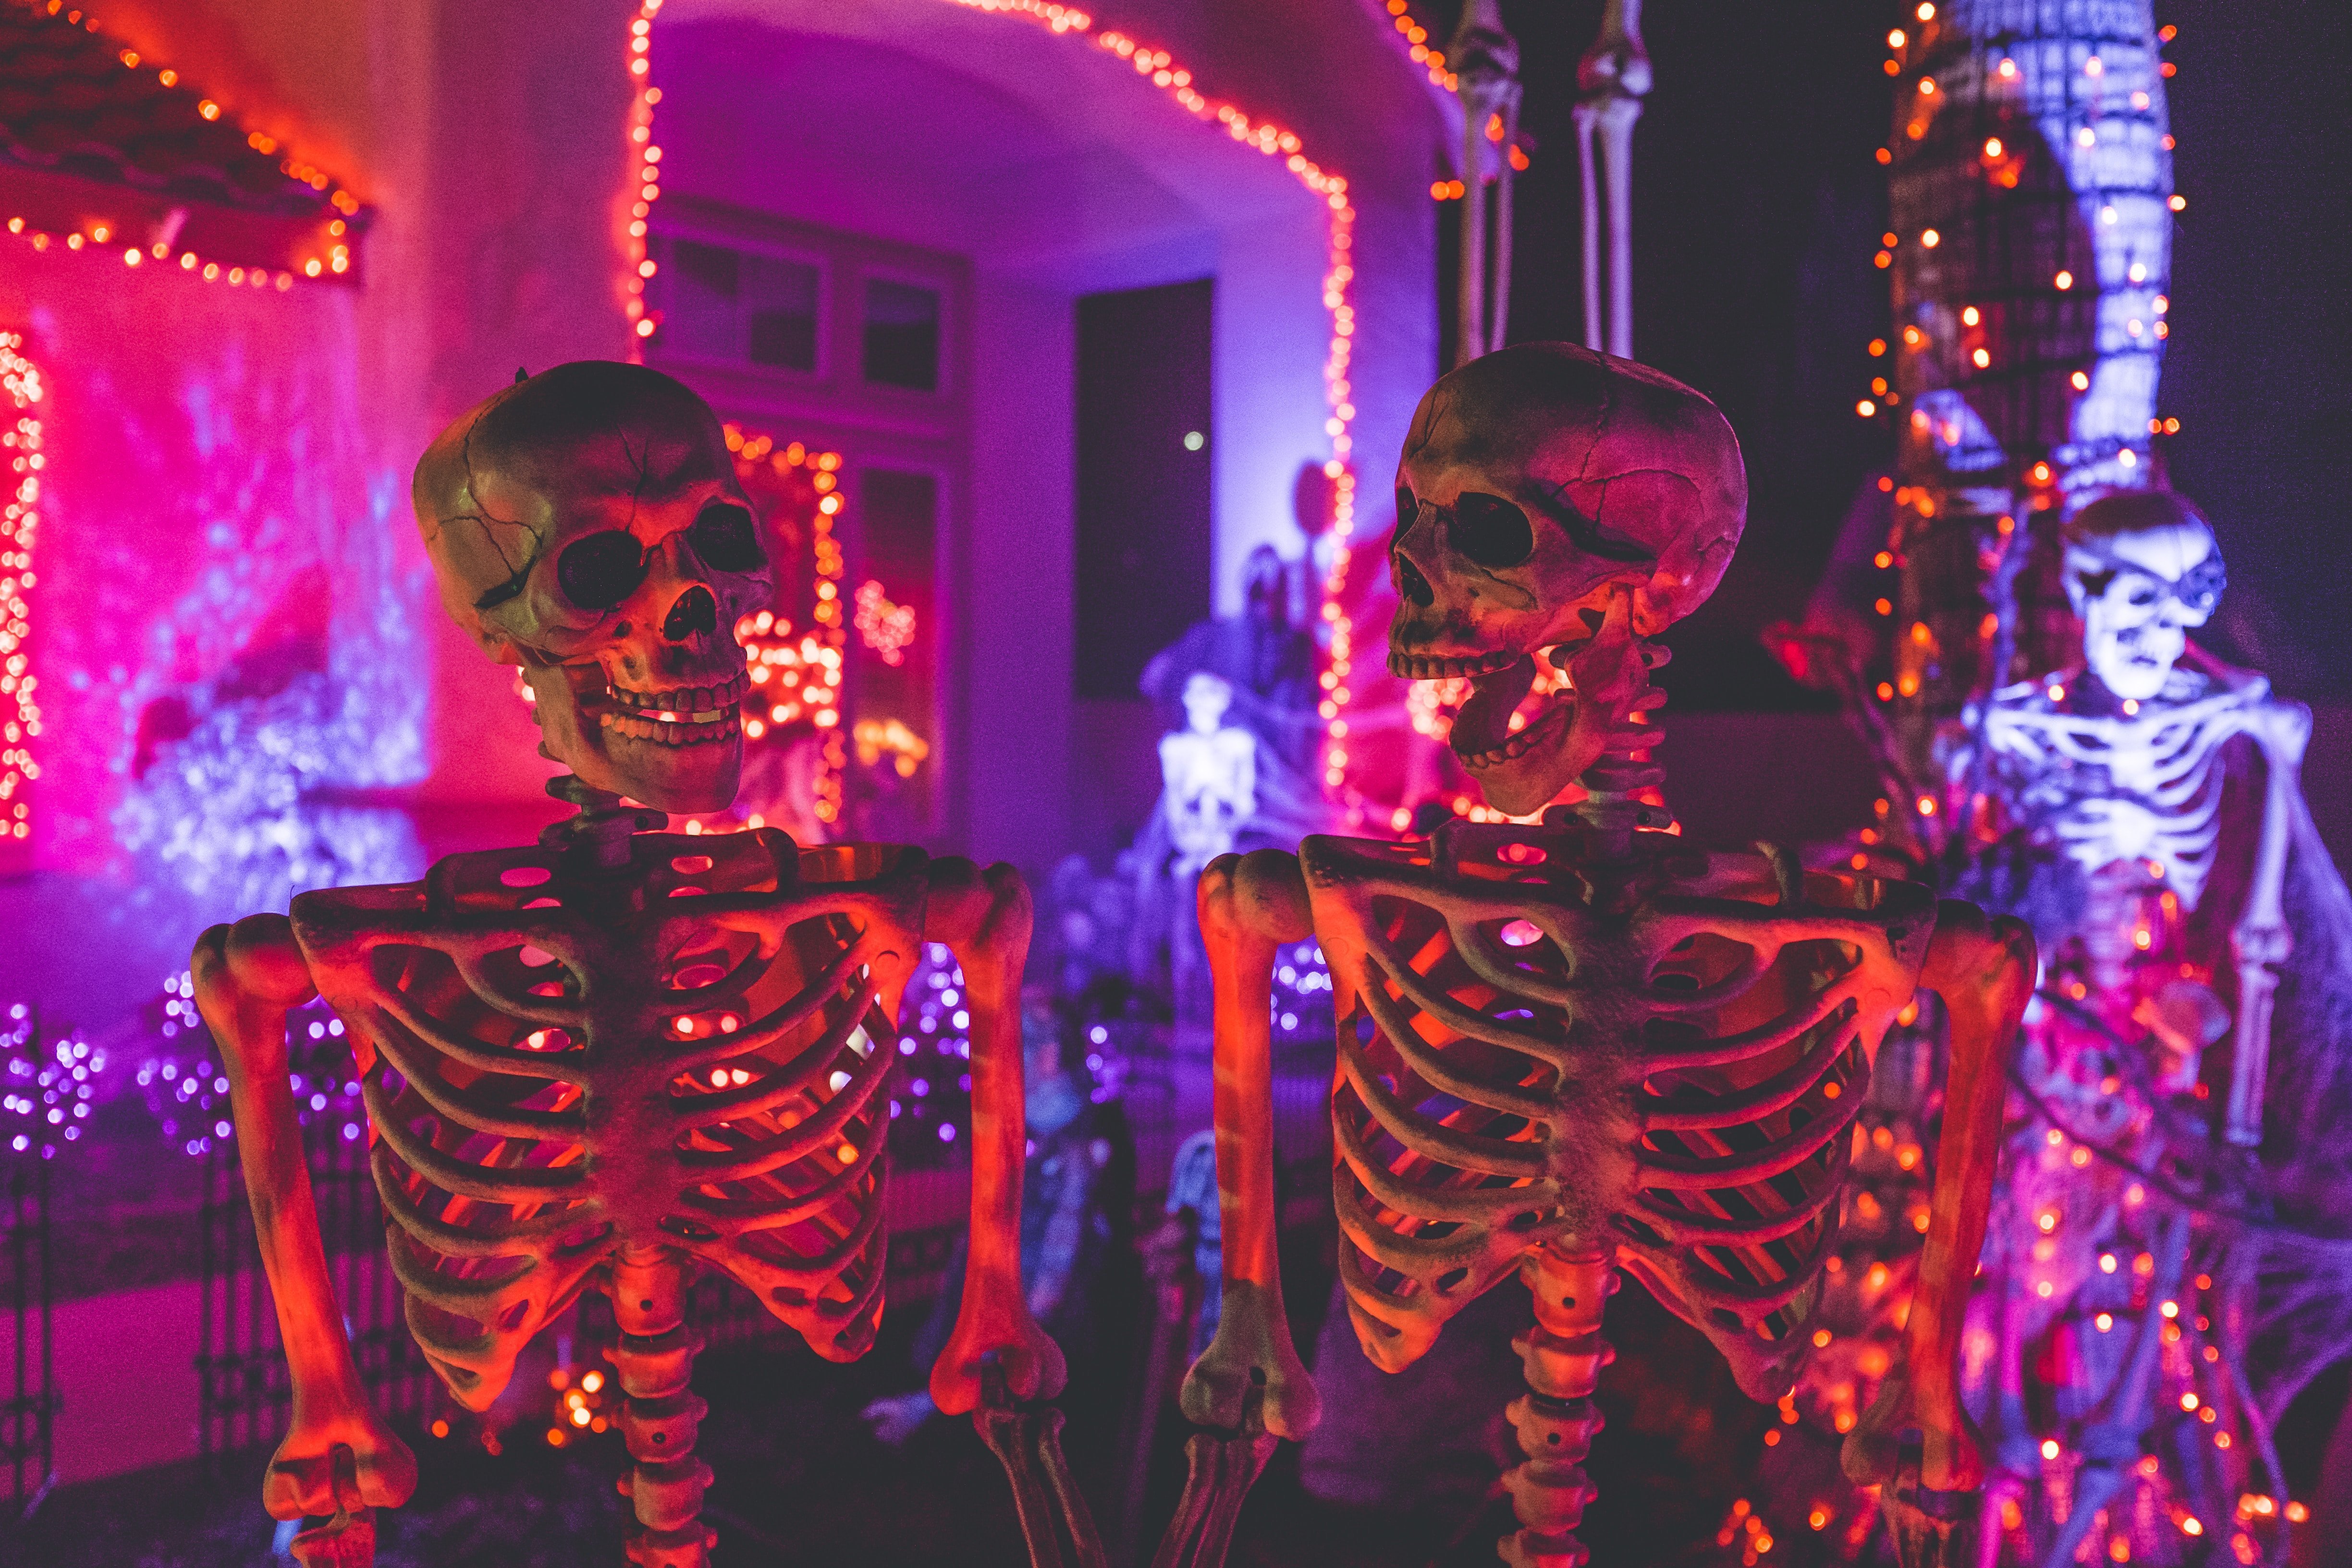 A stunning picture of Halloween decorations | Photo by NeONBRAND on Unsplash